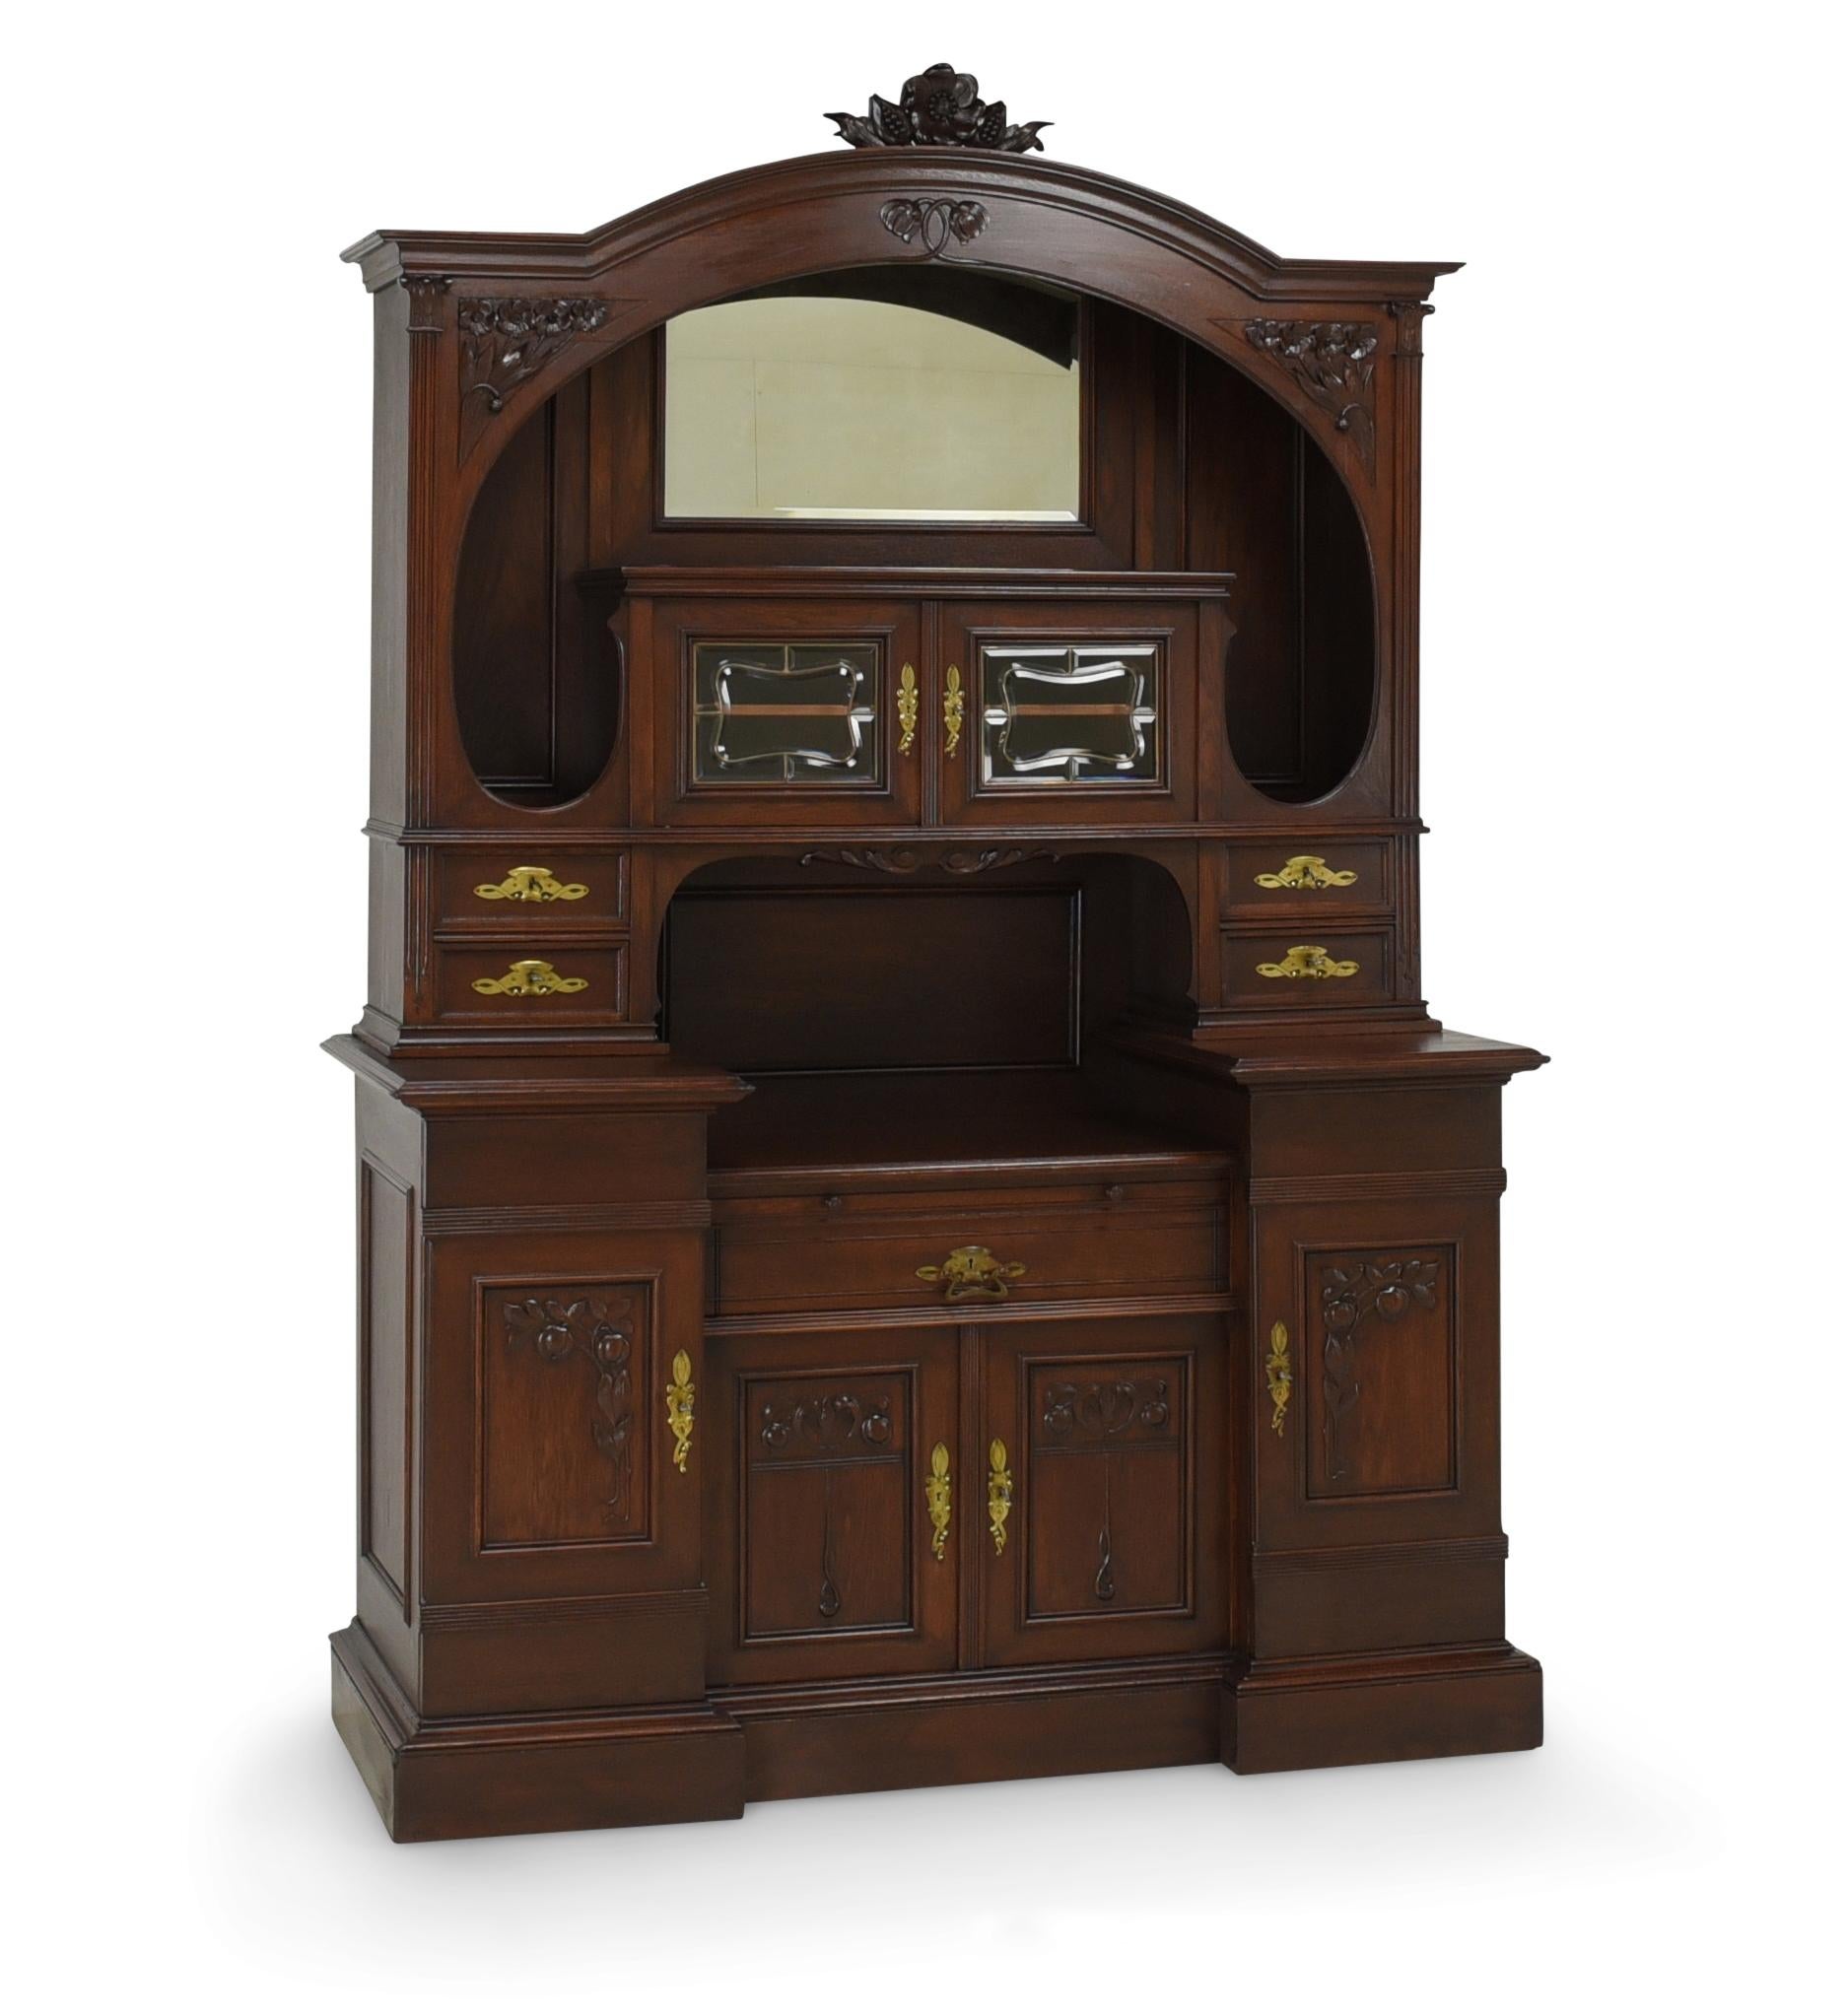 Large buffet cabinet restored Art Nouveau oak XXL display cabinet

Features:
Very high quality processing
Heavy quality
Drawers pronged
Beautiful carved decor
Very nice original fittings
High-quality faceted glazing
Superior lower